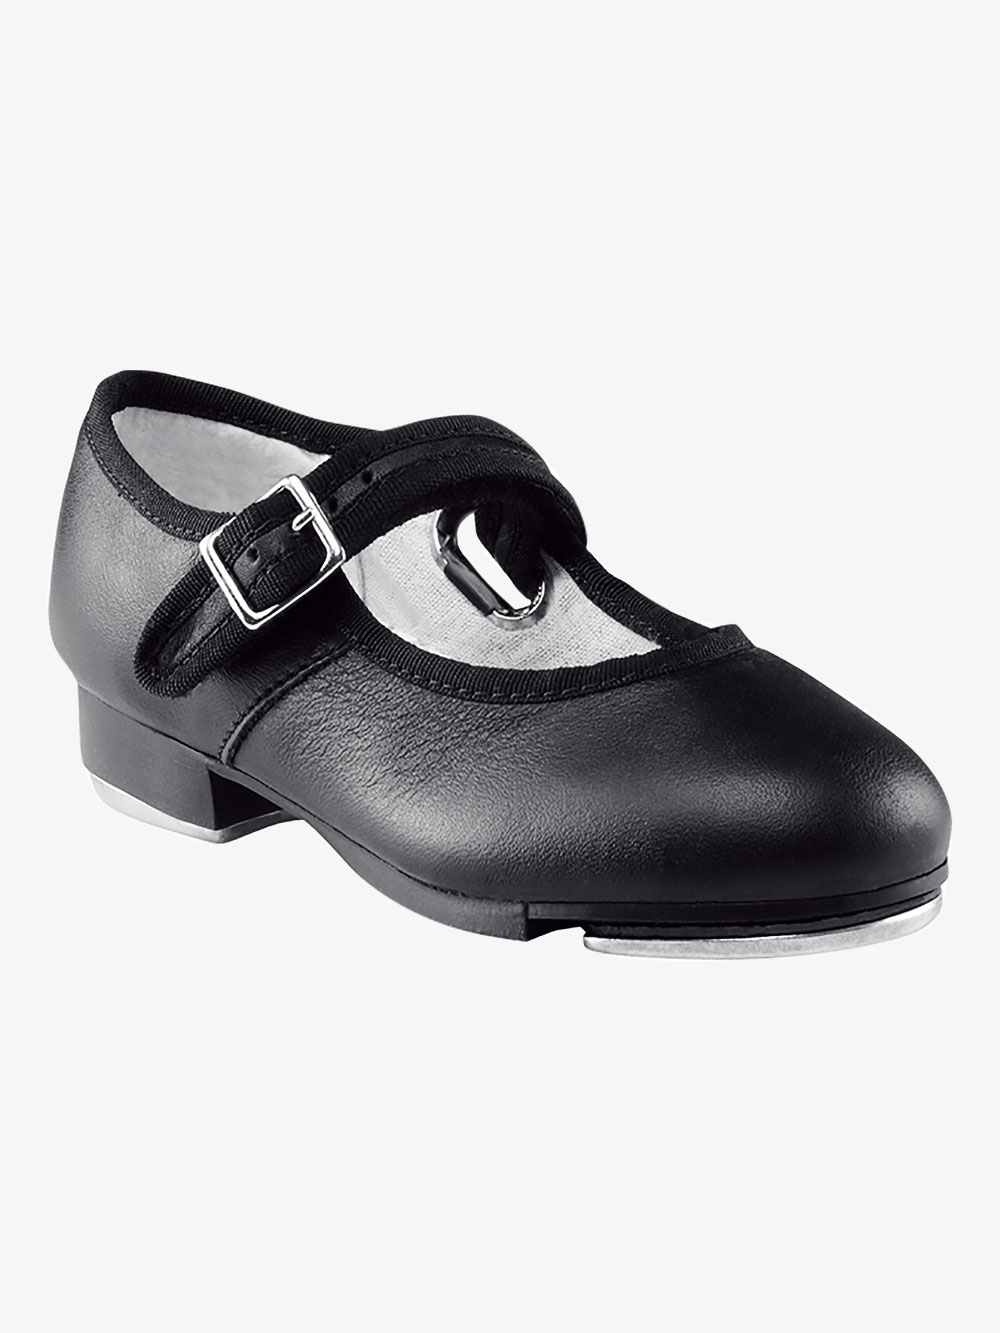 mary jane tap shoes adults